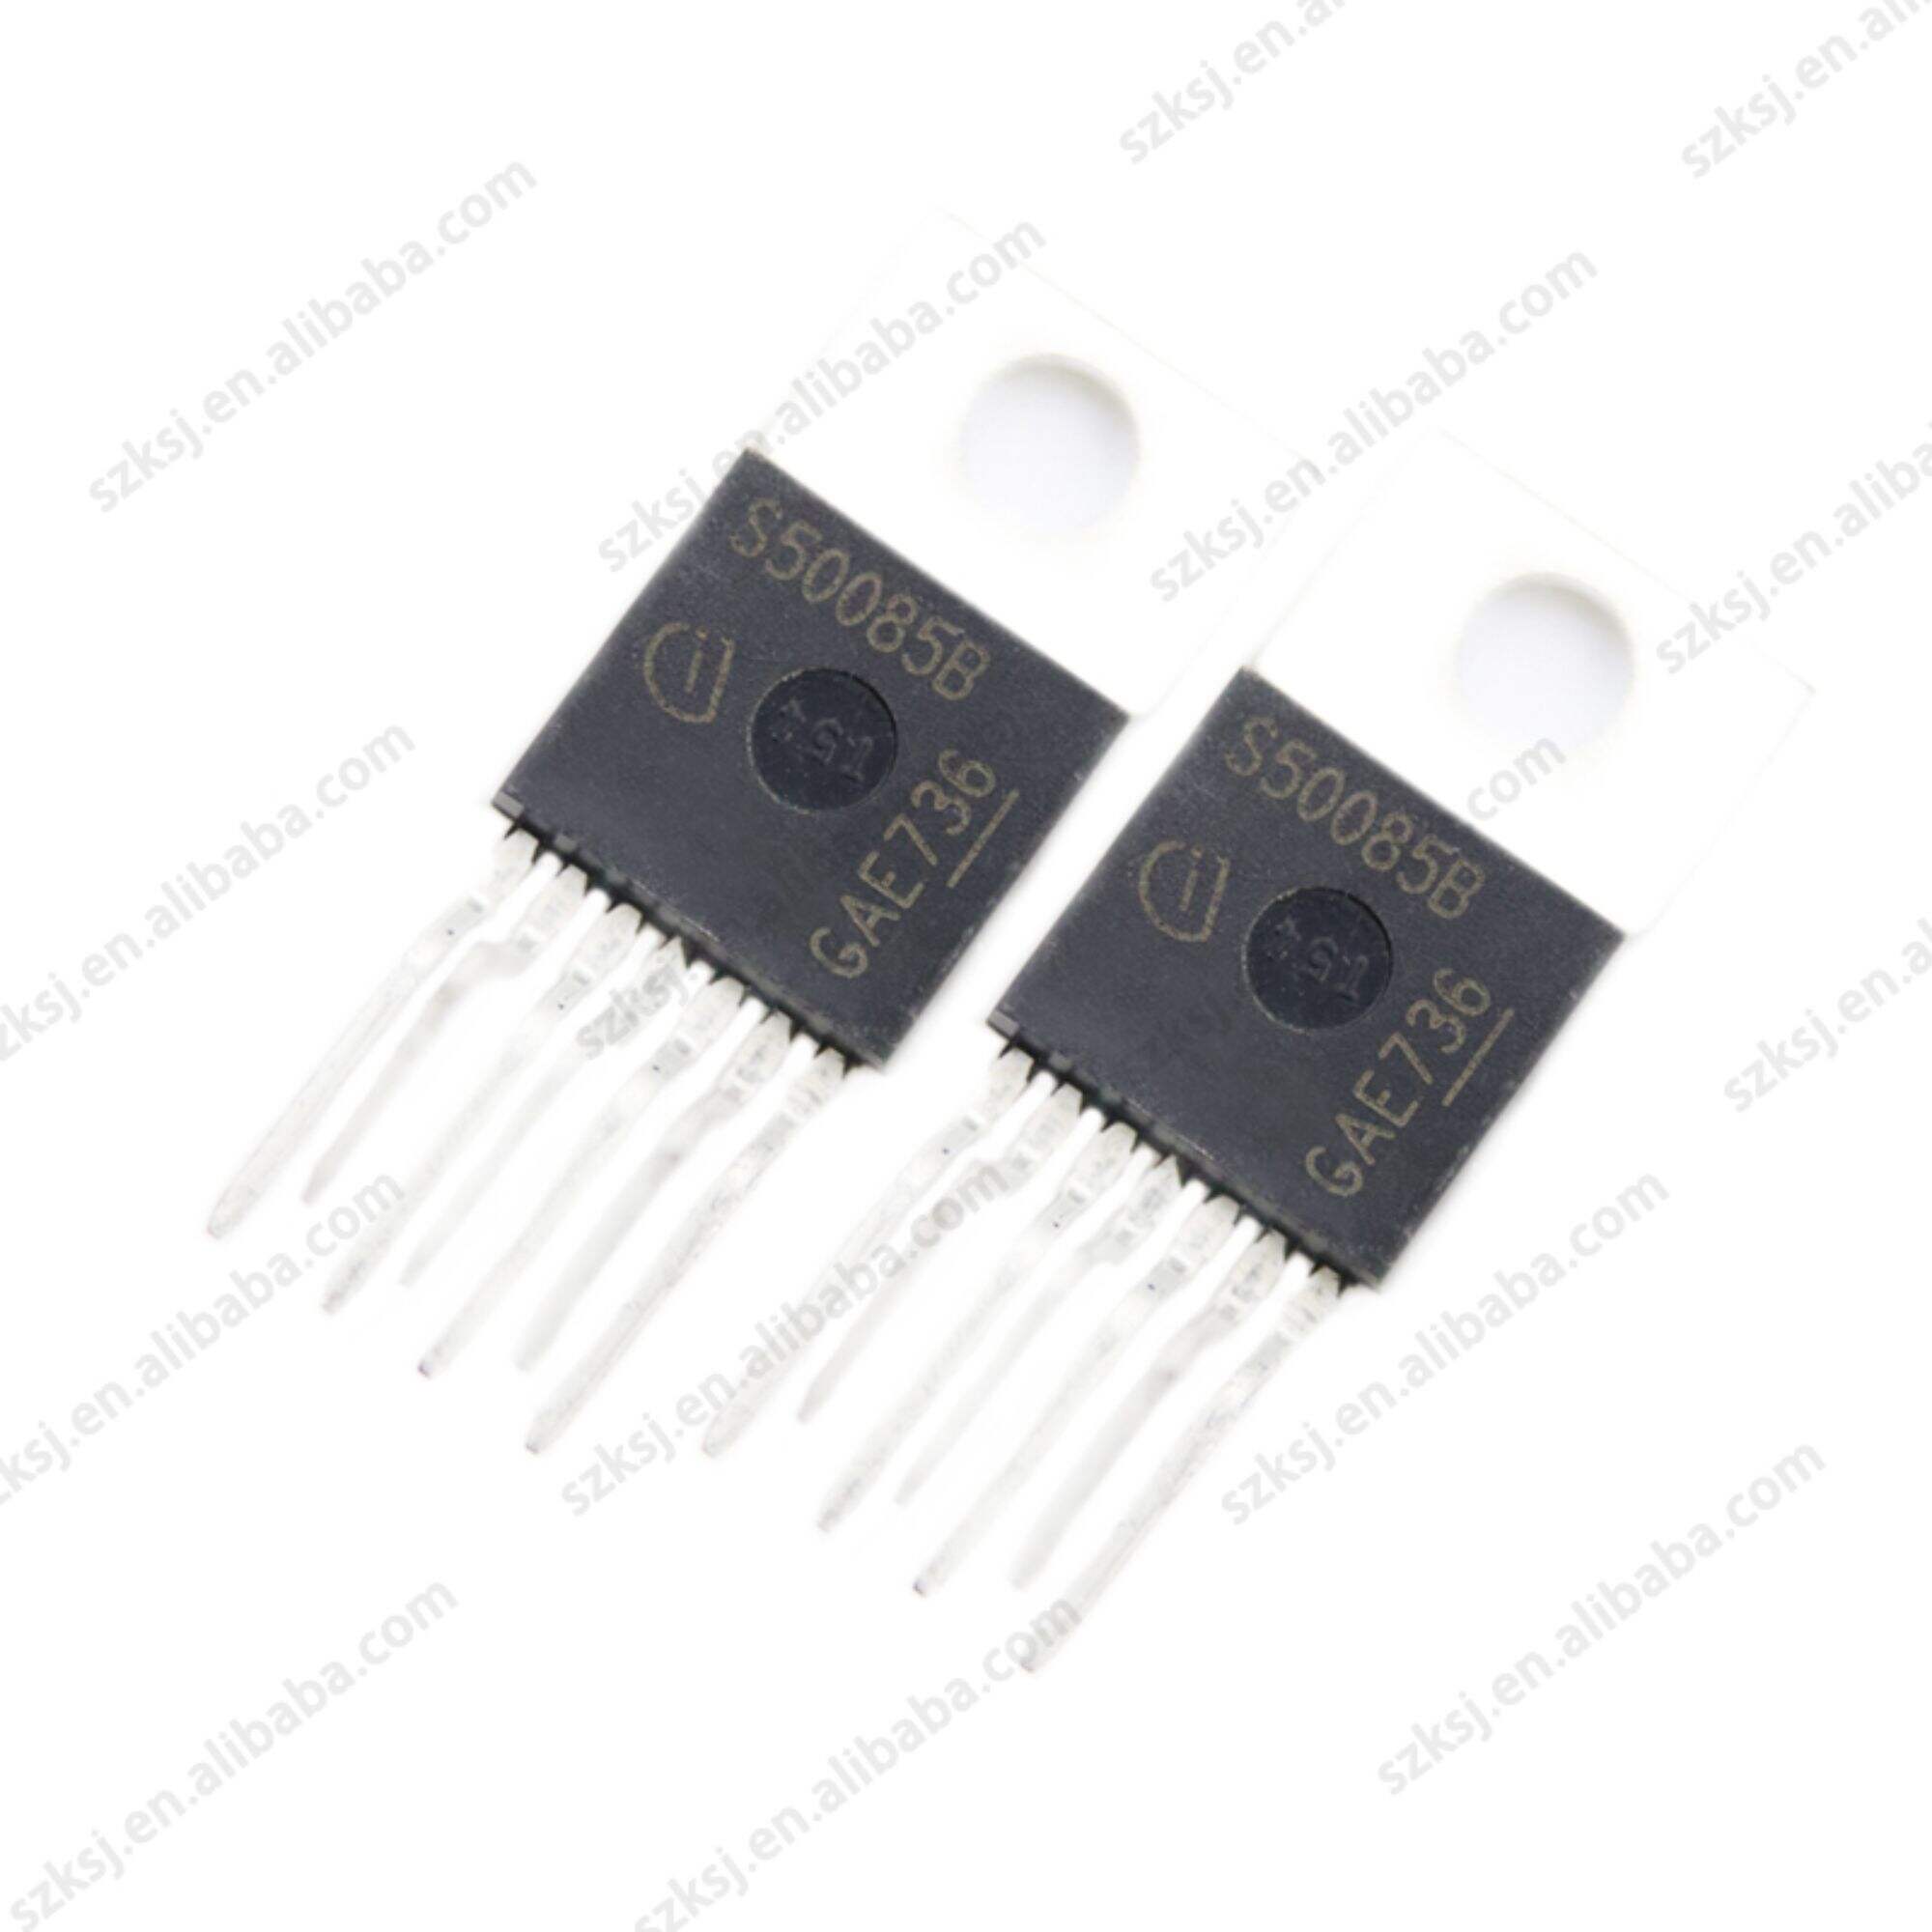 BTS500851TMBAKSA1 BTS50085B new original stock power electronic switch IC chip P-TO220-7-11 IC